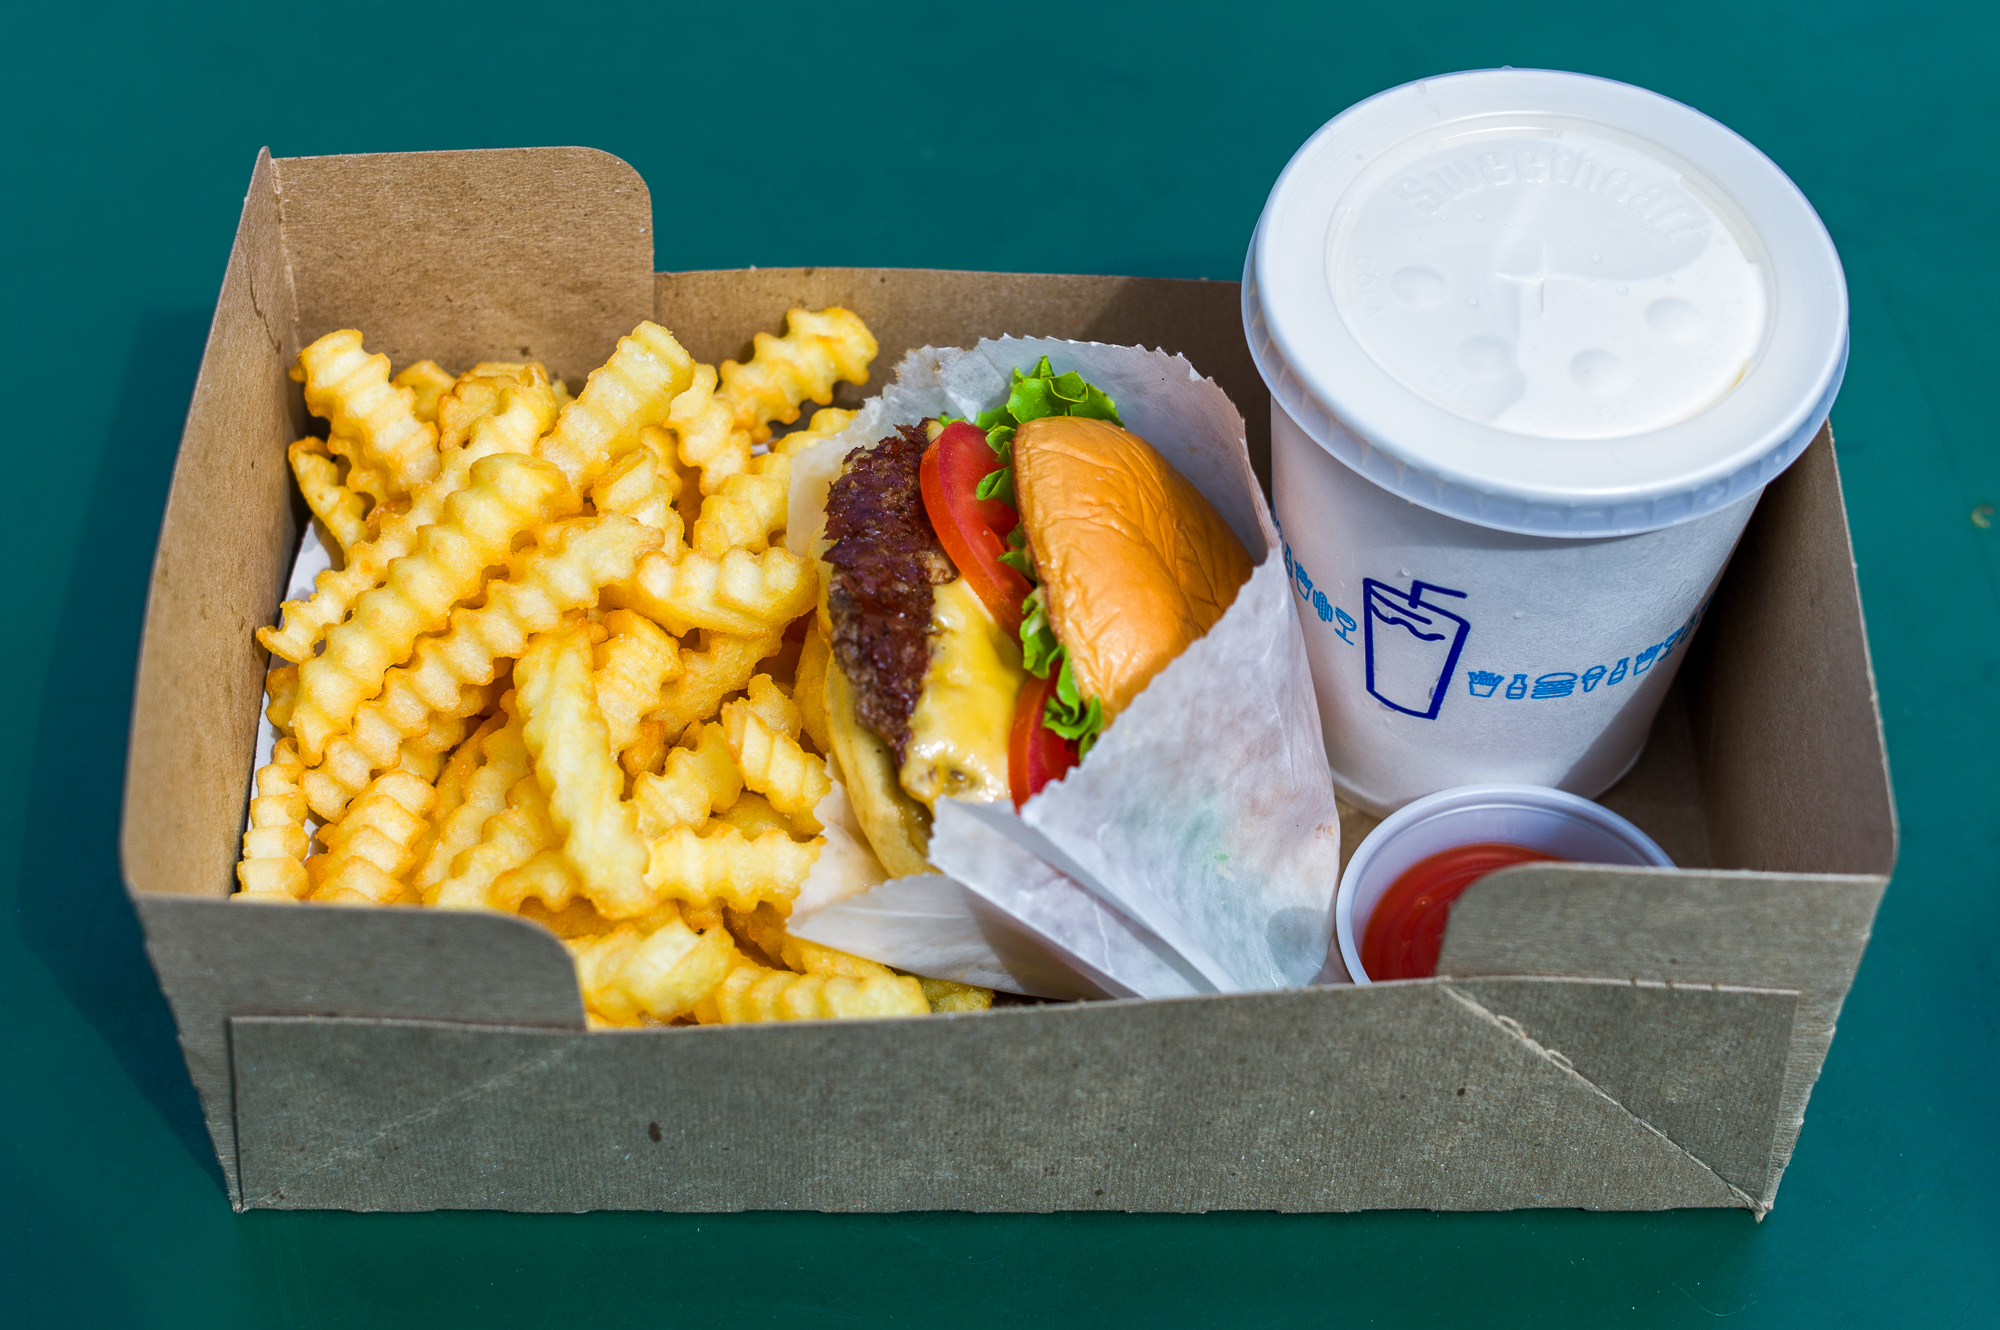 A Shake Shack burger, crinkle fries, and a drink in a paper box